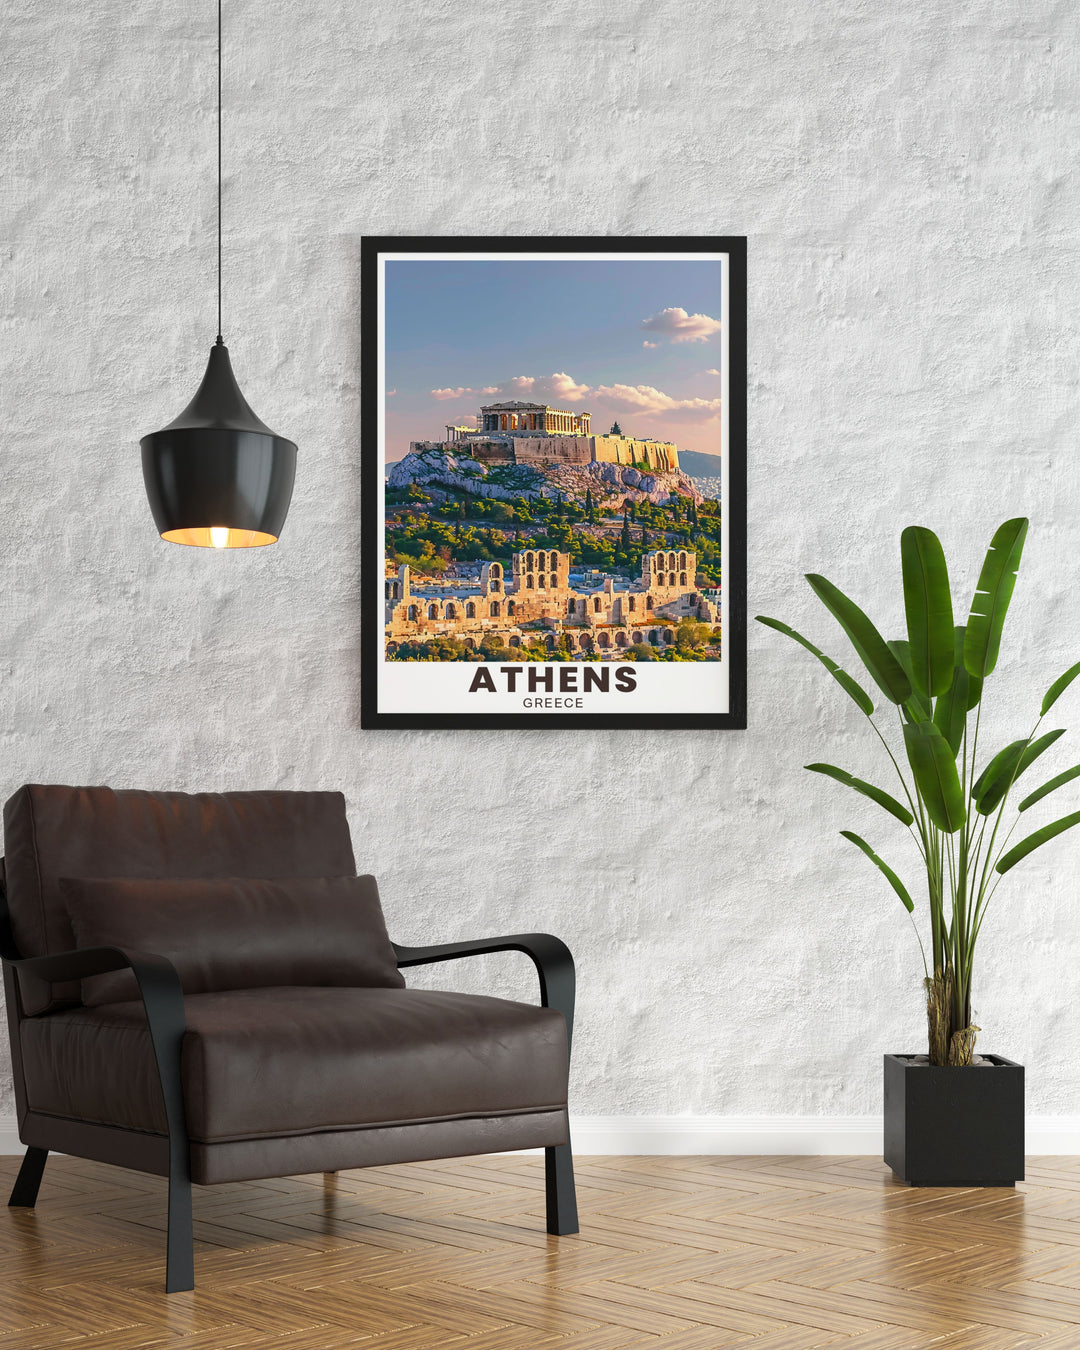 Athens Greece Print depicting the Acropolis of Athens with the Partheon perfect for adding a touch of historical beauty to your home decor ideal as traveler gifts or for anyone who loves the rich history and architecture of Greece